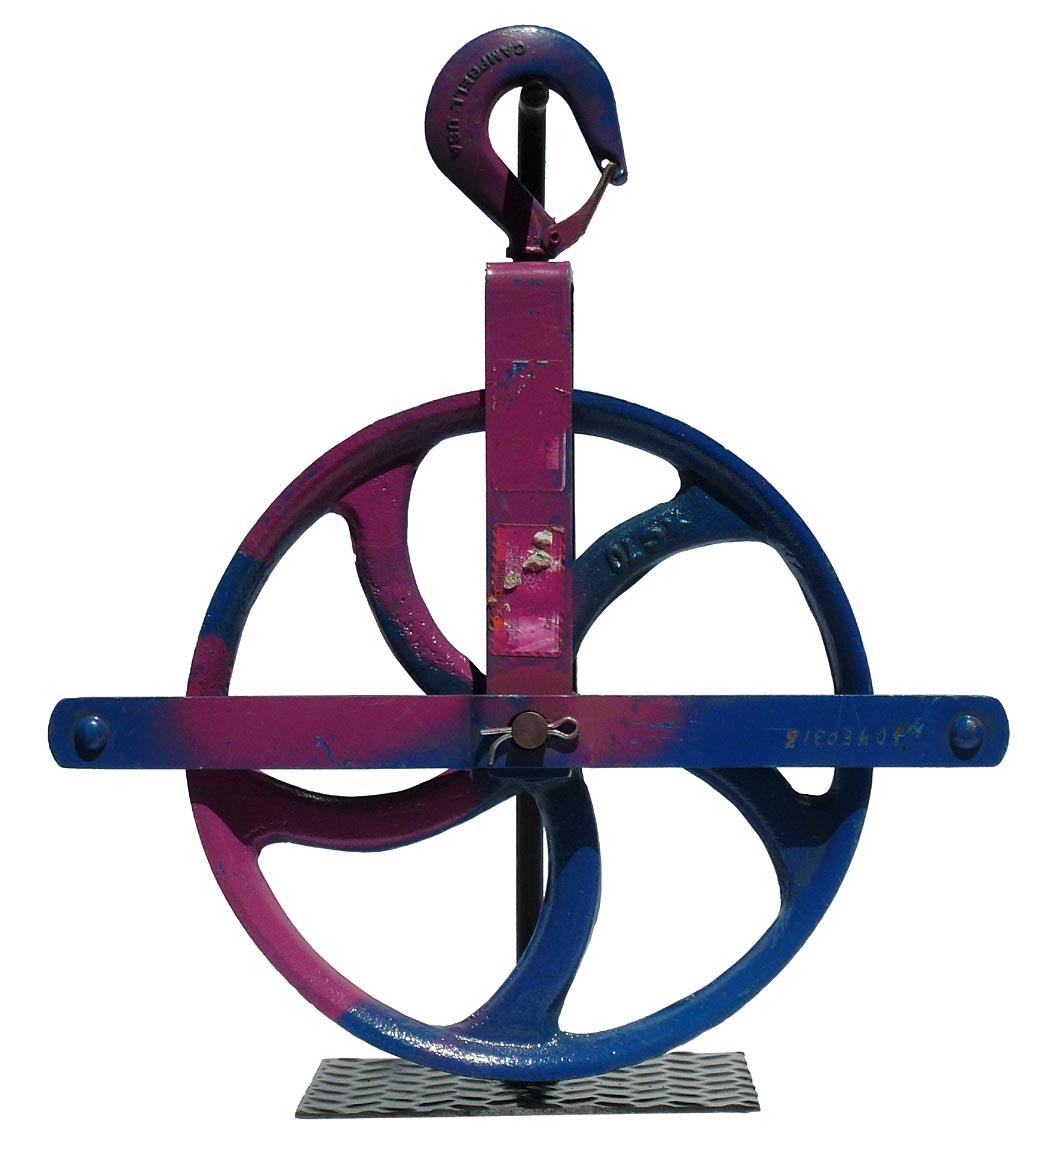 This is a colorful, large industrial cast iron pulley with older working overpaint.This pulley is painted bright blue and pink. It measures 17 3/4